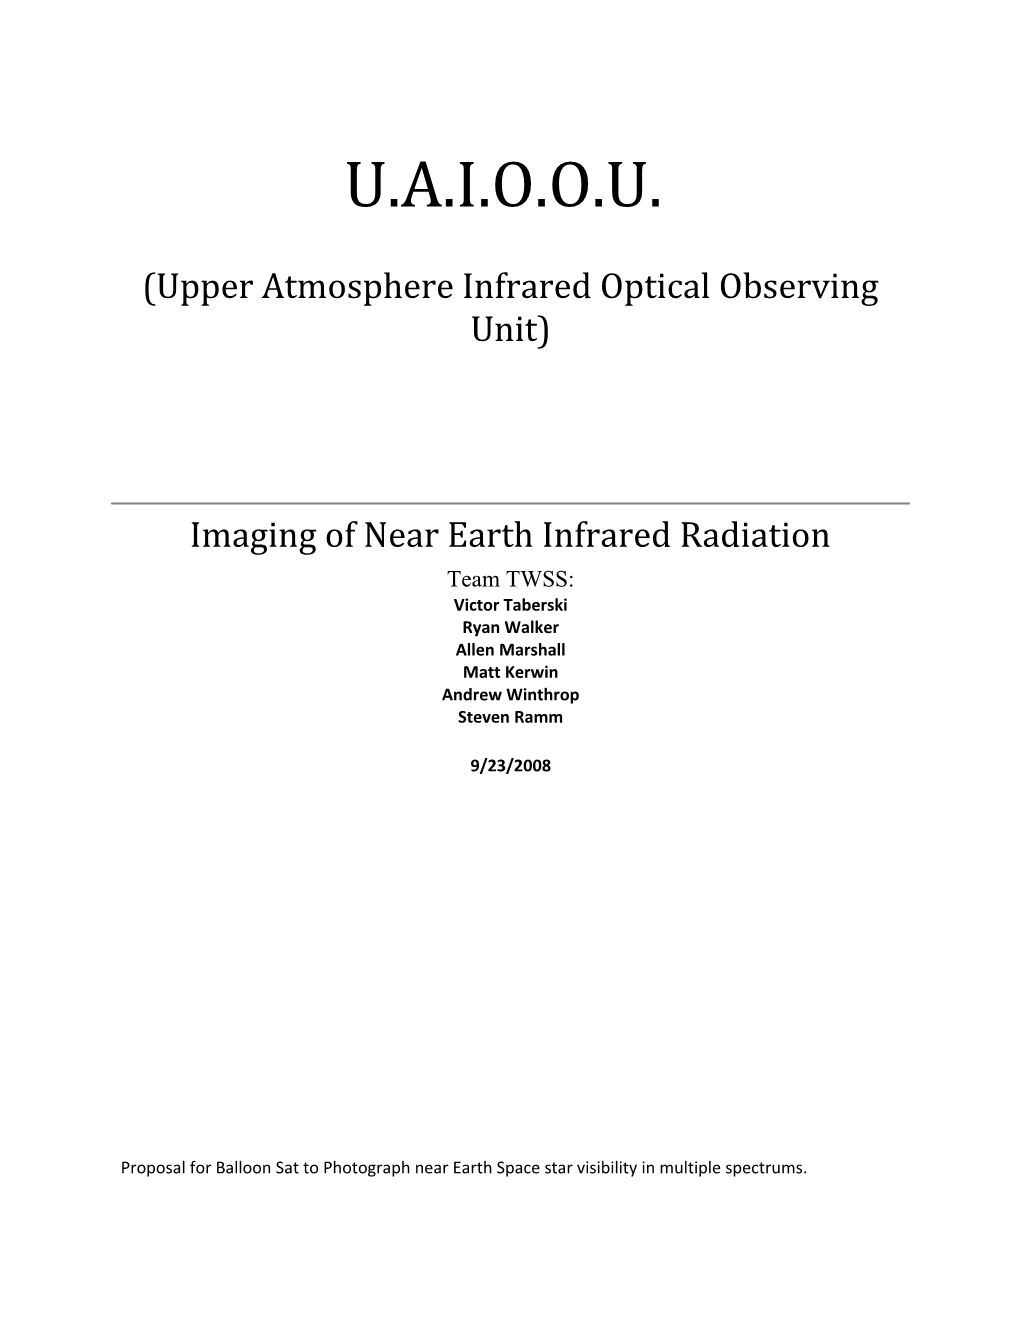 UAIOOU (Upper Atmosphere Infrared Optical Observing Unit)